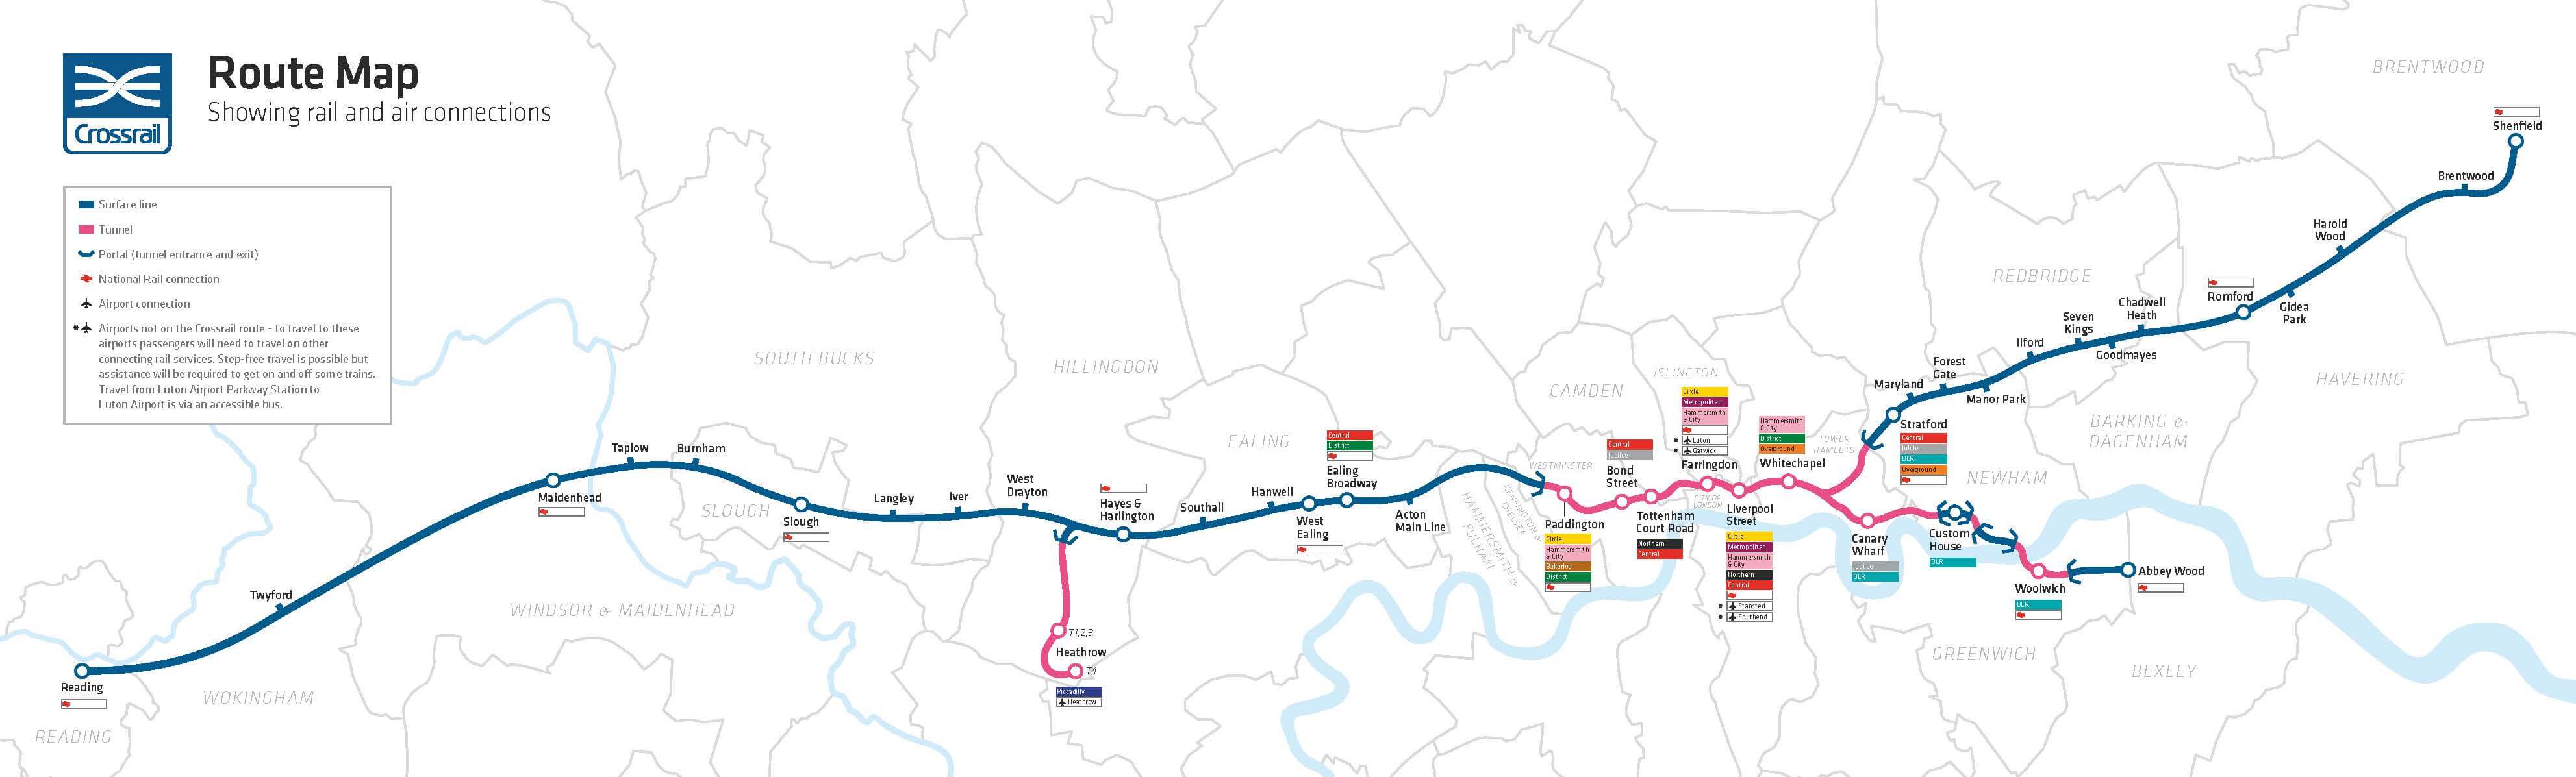 Map showing all 42 new stations for the new Elizabeth Line from Crossrail in London